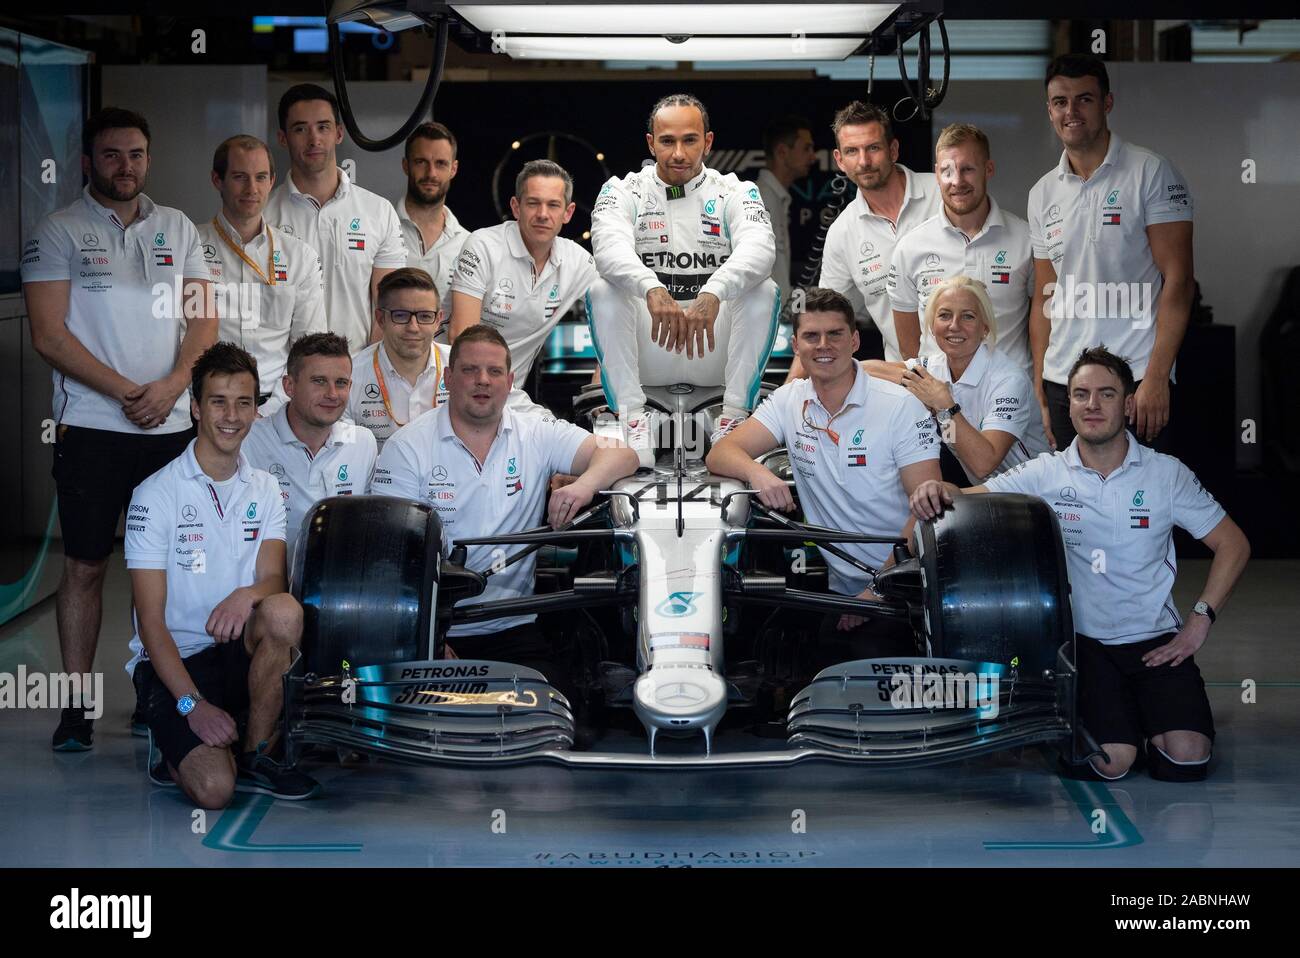 Abu Dhabi, United Arab Emirates. 28th Nov, 2019. Mercedes AMG Petronas F1 Team's British driver Lewis Hamilton poses for photos with his team prior to the start of the Abu Dhabi Formula 1 Grand Prix weekend at the Yas Marina Circuit in Abu Dhabi. Credit: SOPA Images Limited/Alamy Live News Stock Photo